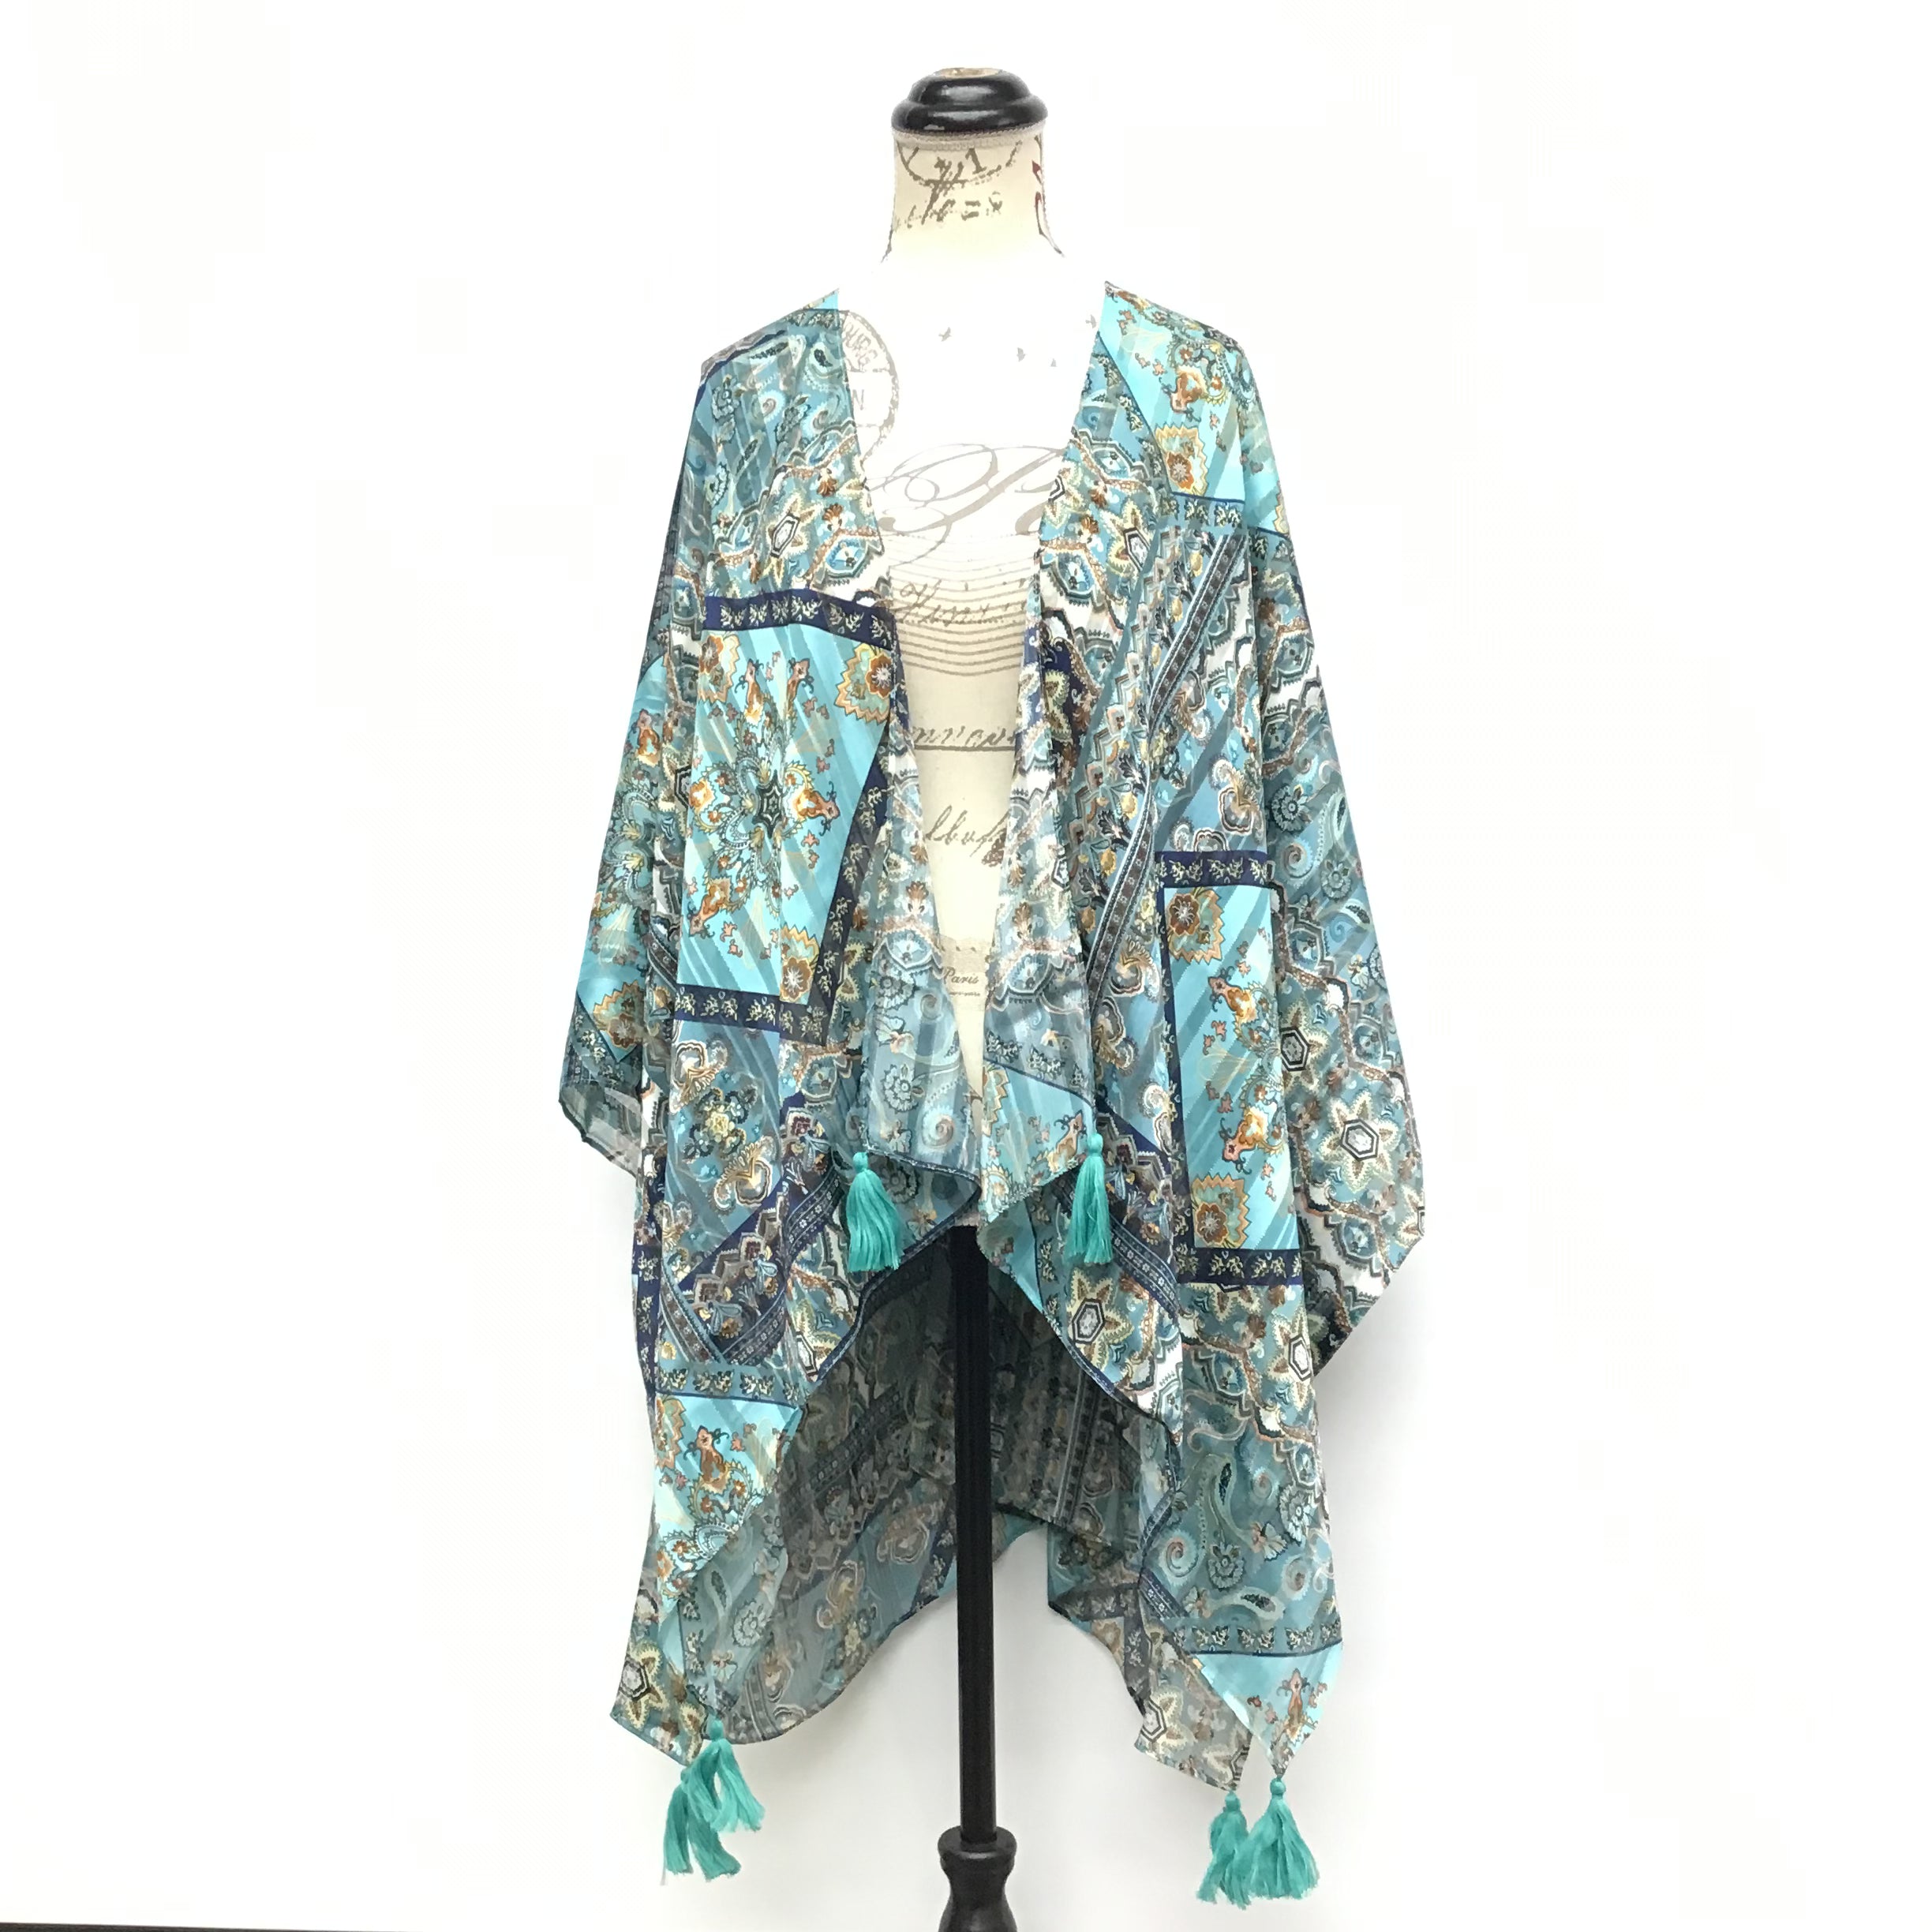 Simply Noelle Wrap in Pearl and Teal